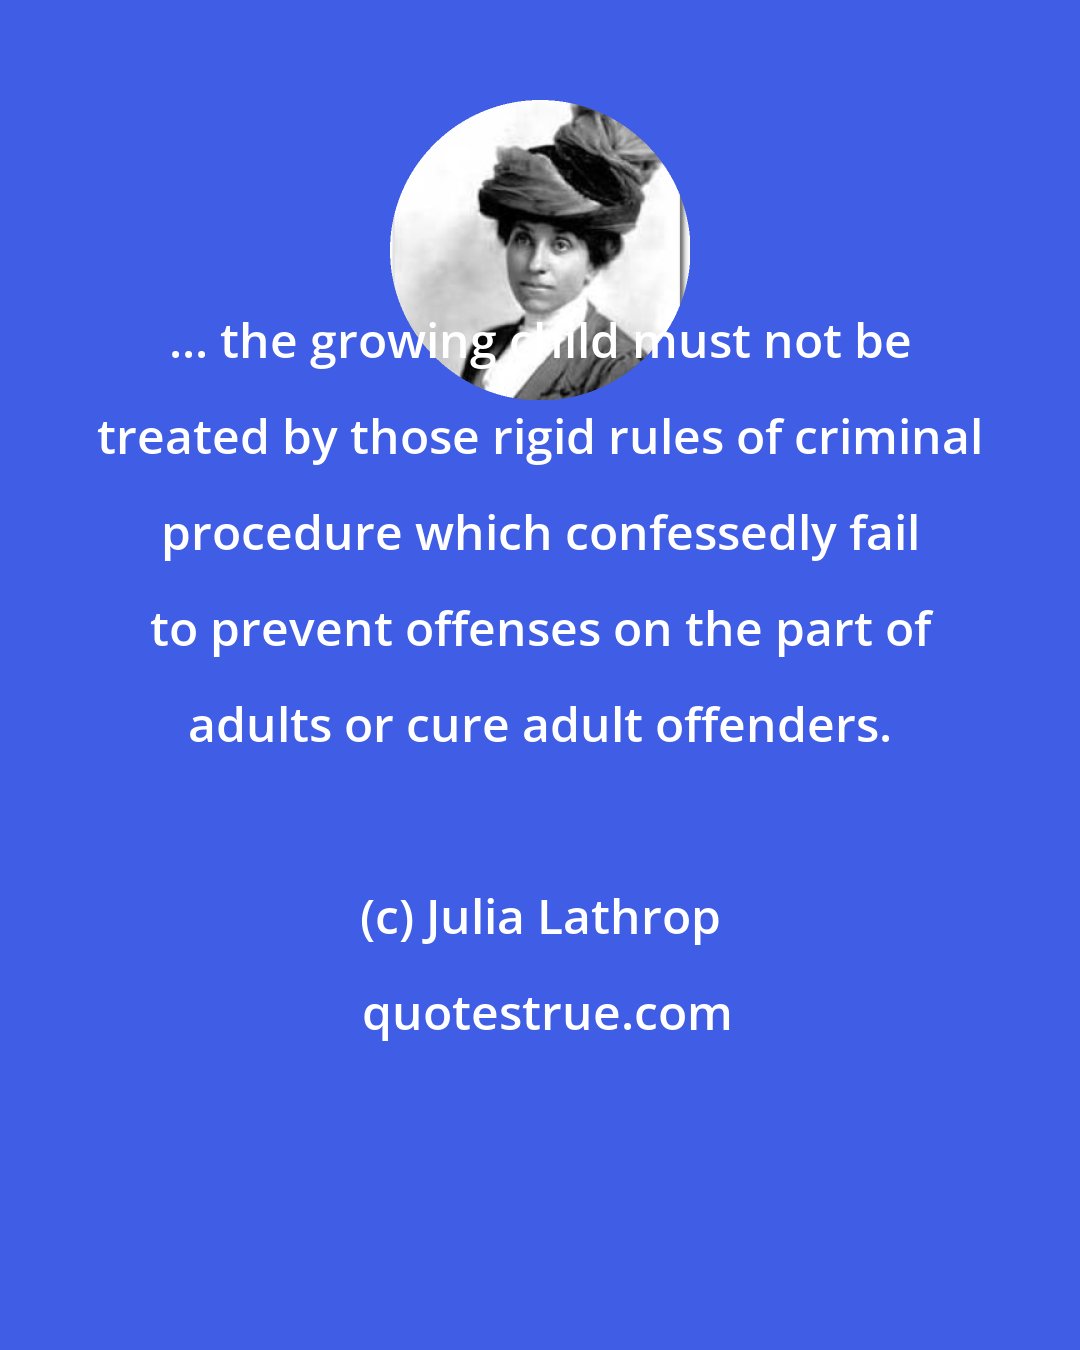 Julia Lathrop: ... the growing child must not be treated by those rigid rules of criminal procedure which confessedly fail to prevent offenses on the part of adults or cure adult offenders.